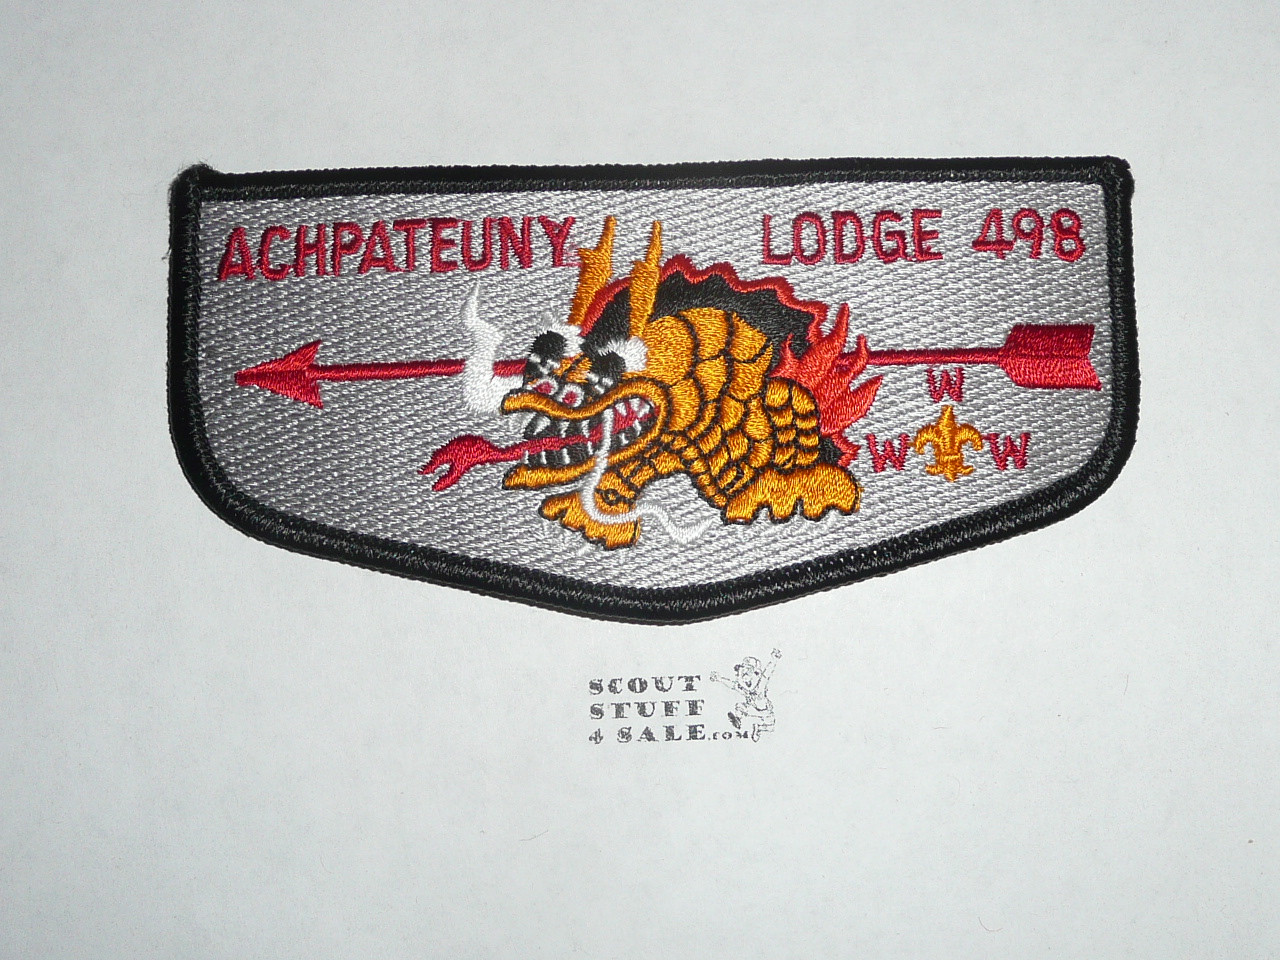 Order of the Arrow Lodge #498 Achpateuny s4 Flap Patch